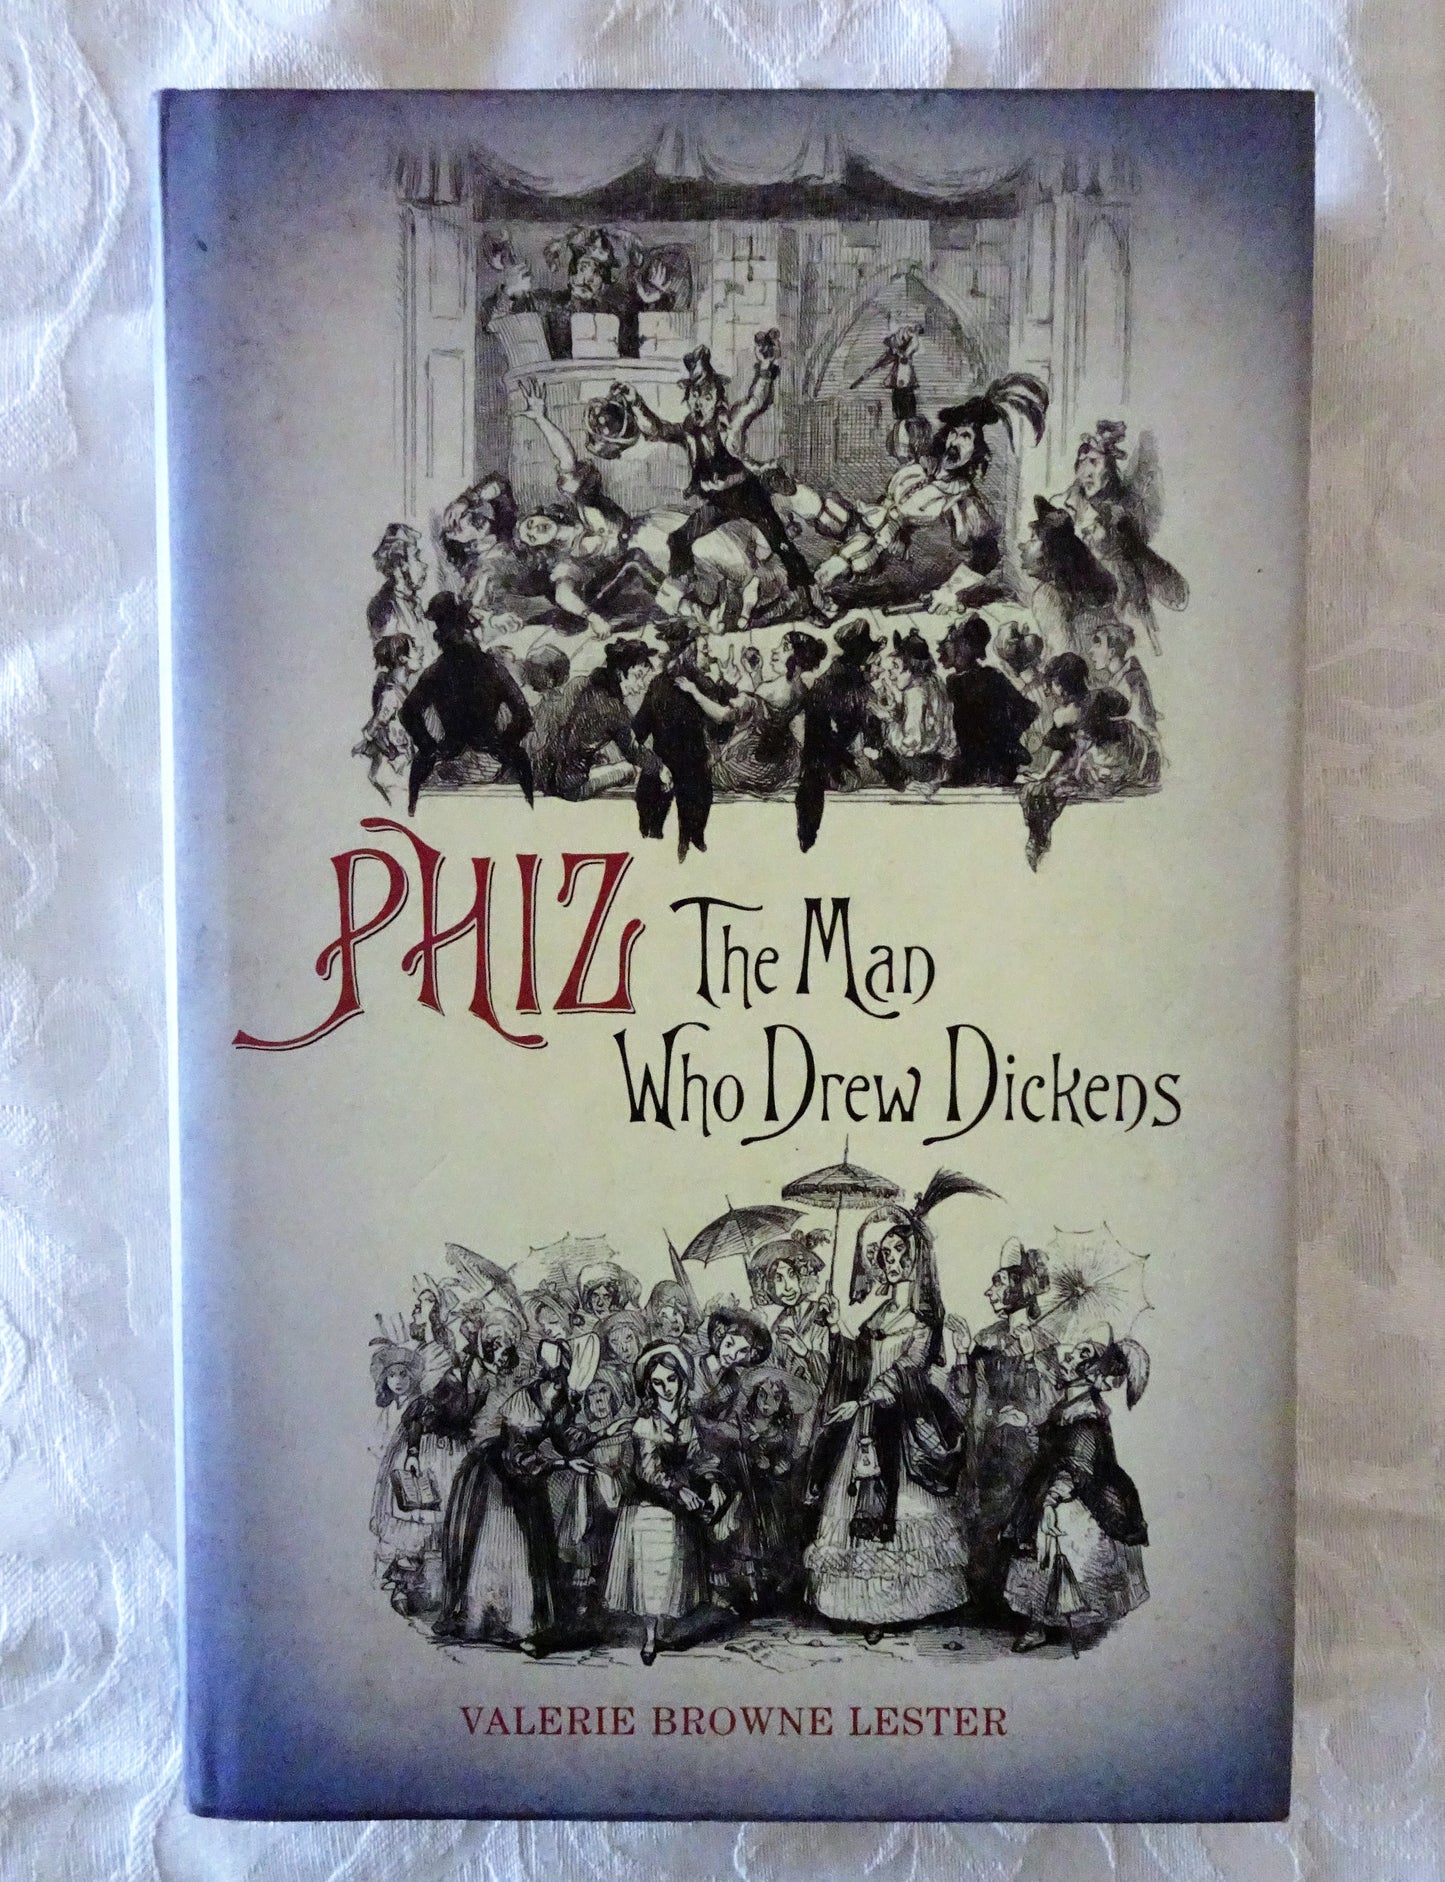 PHIZ The Man Who Drew Dickens by Valerie Browne Lester